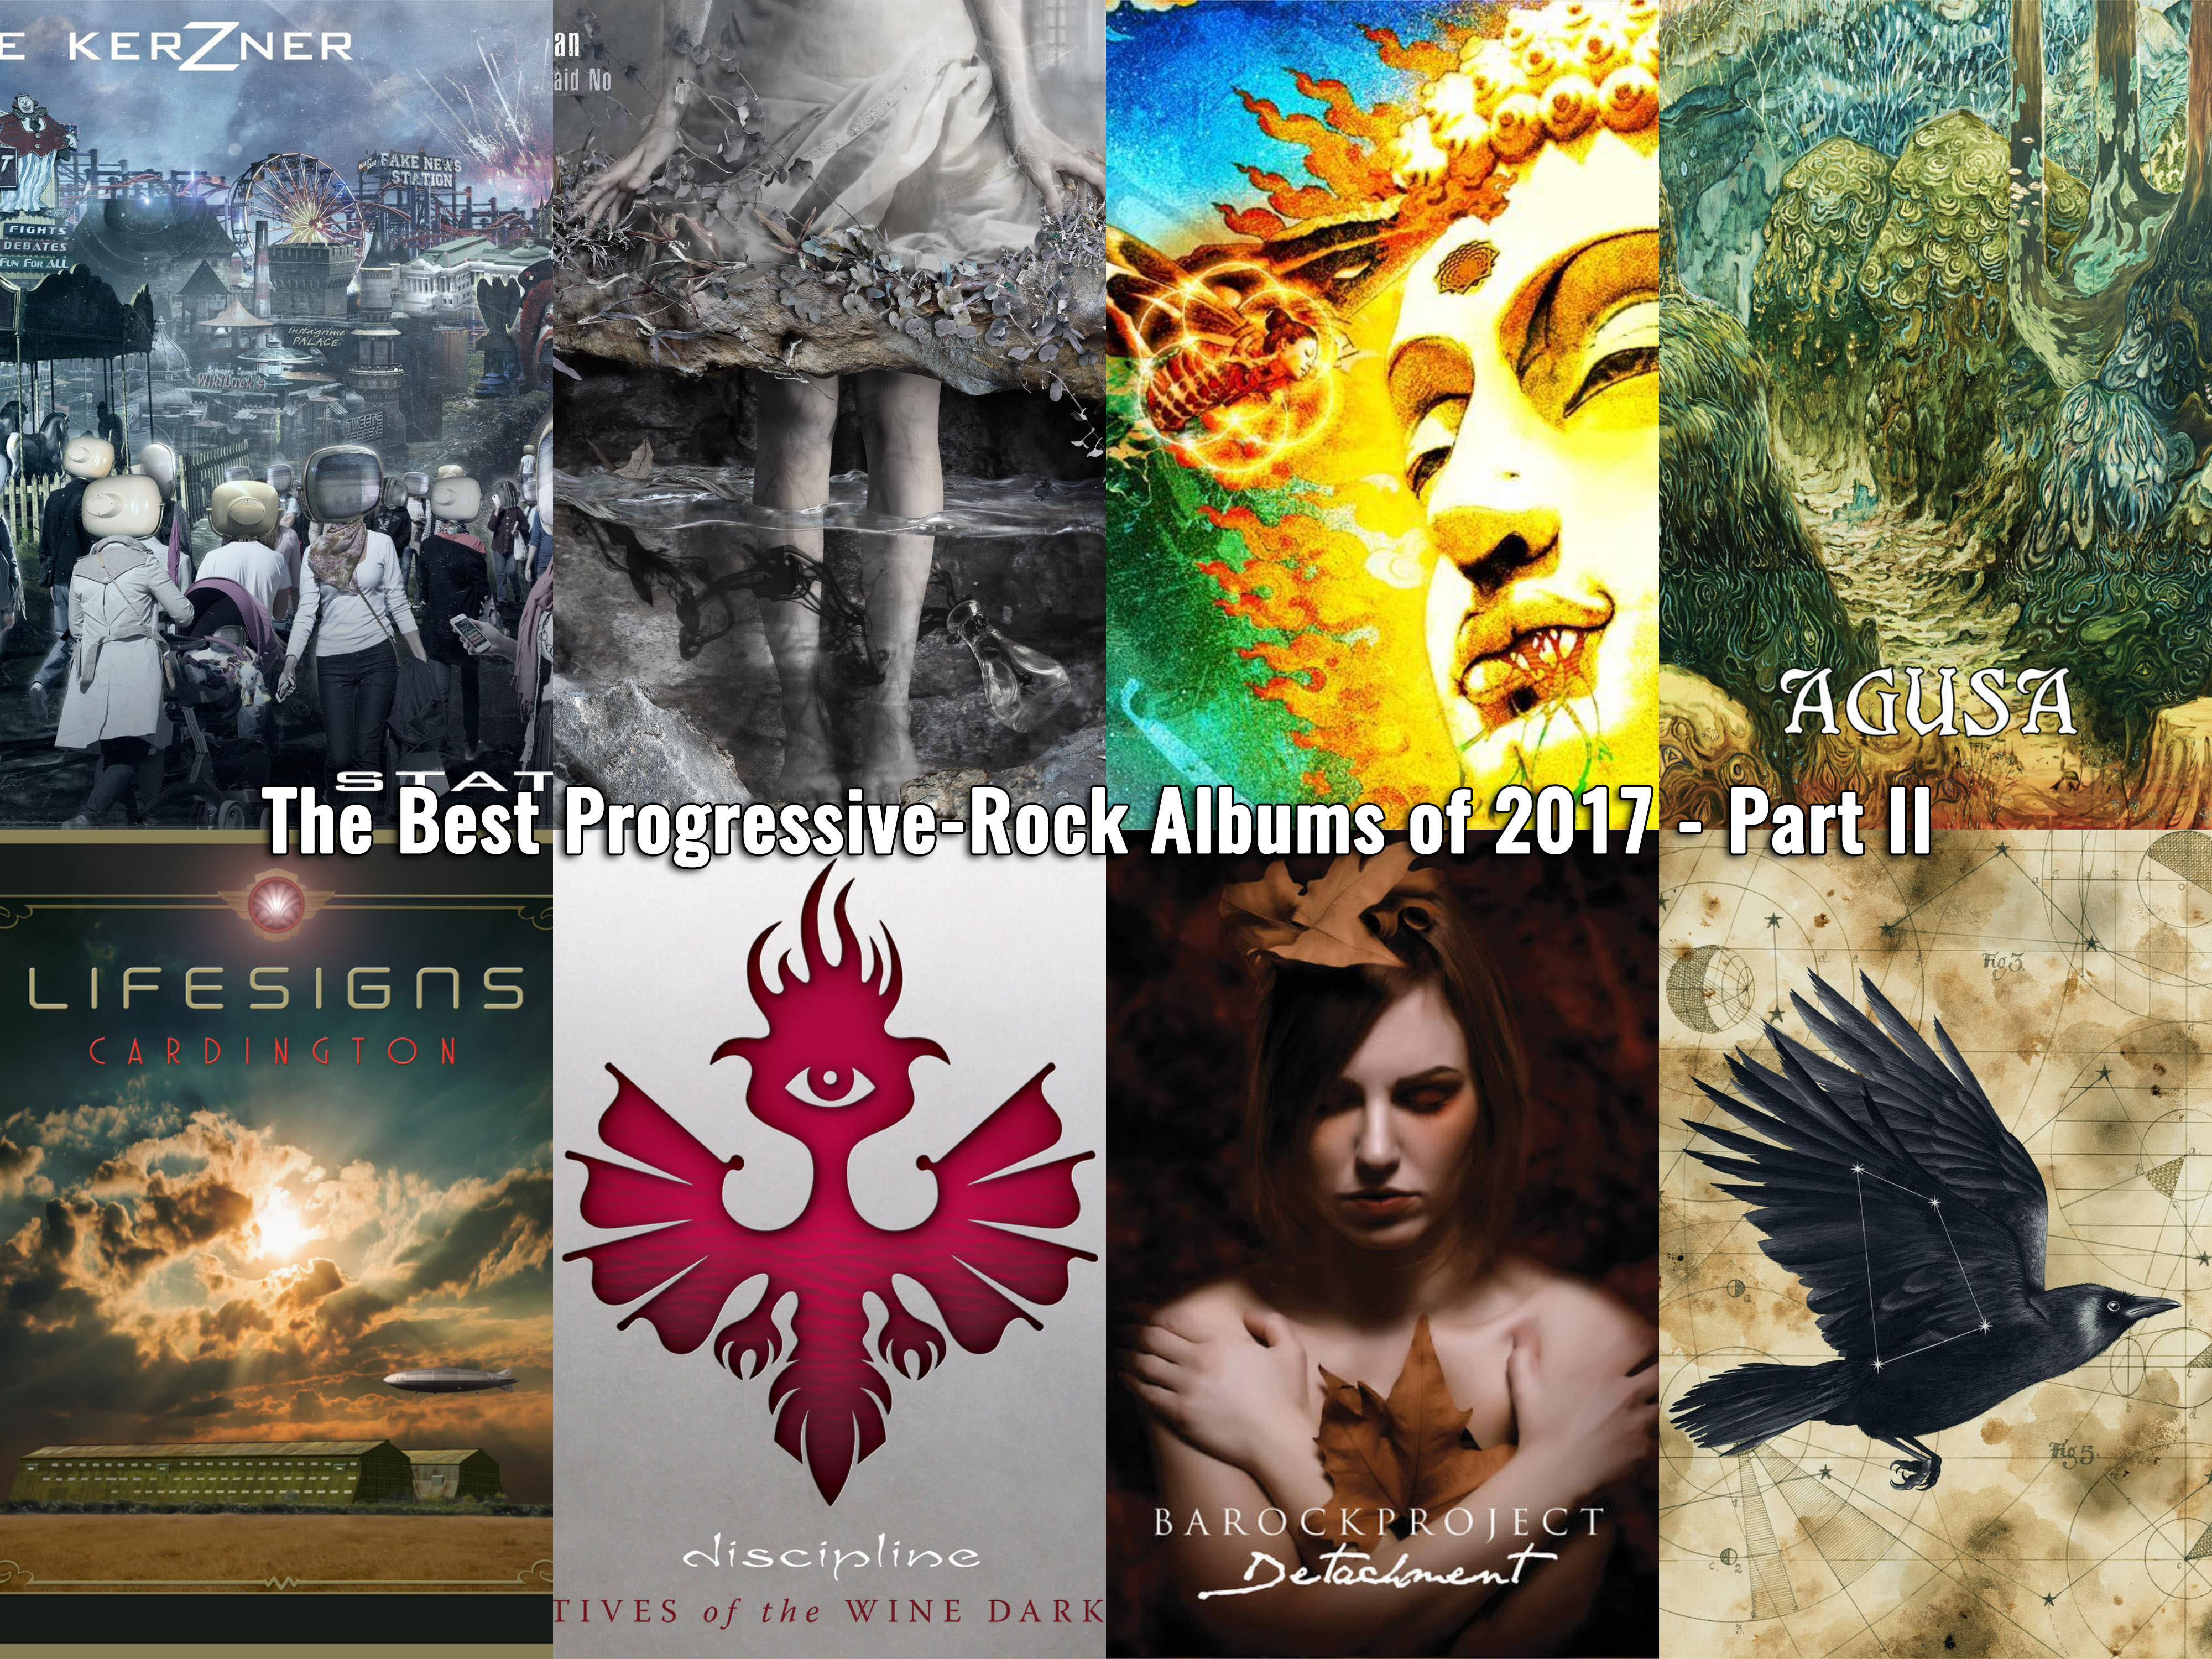 A Year In Review: The Best Progressive-Rock Albums of 2017 (Part II)4000 x 3000